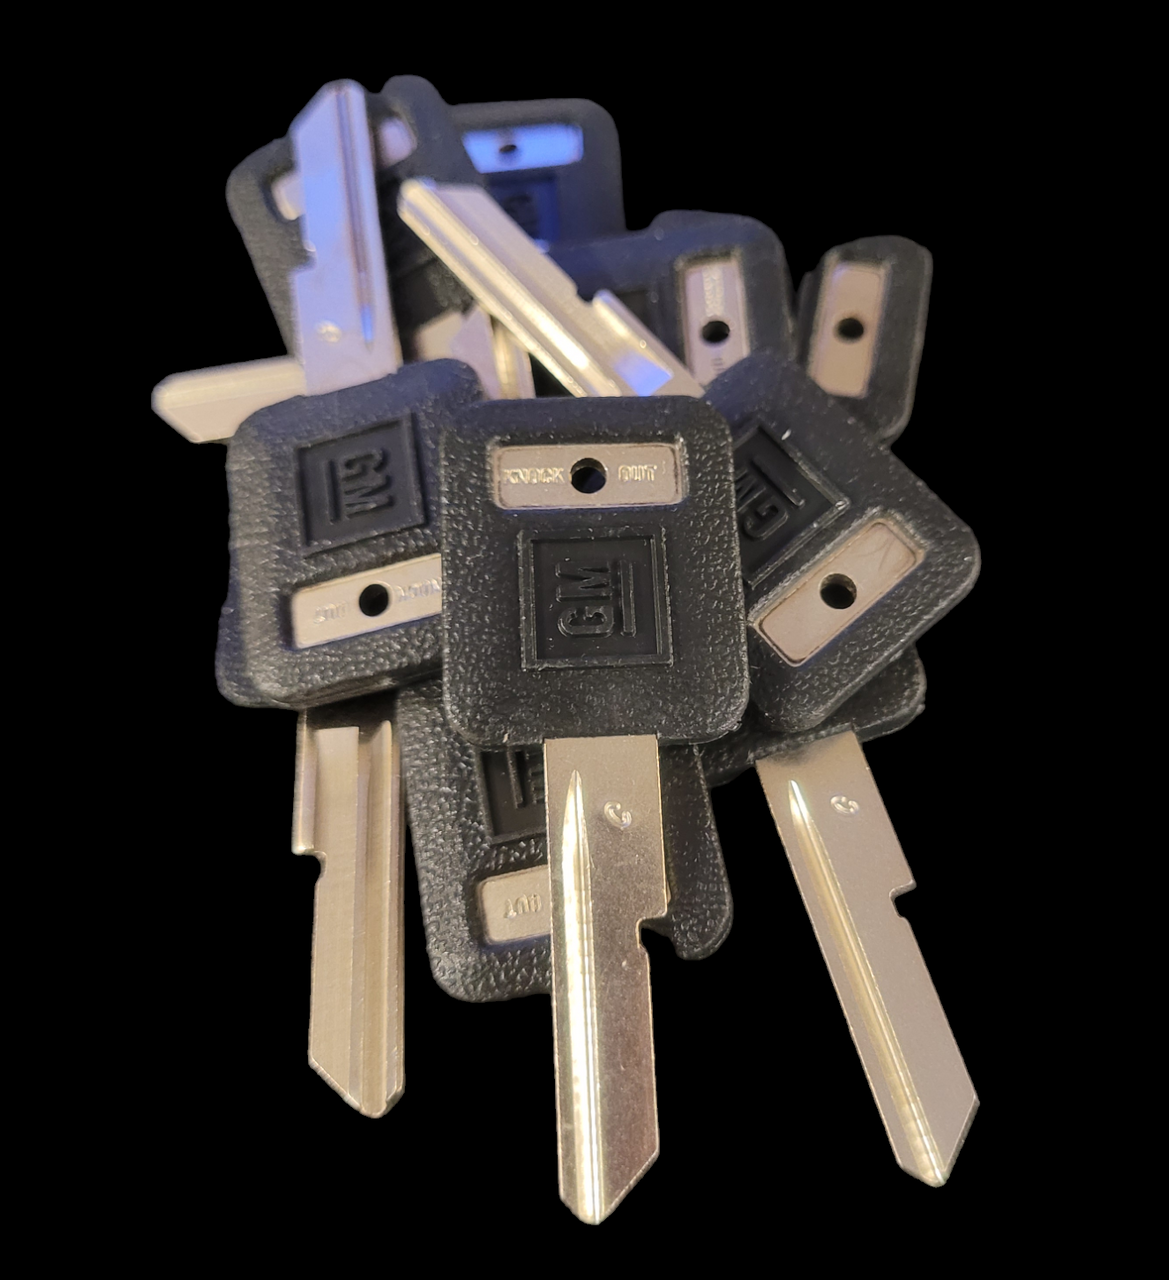 Strattec 594032 GM Rubber Key C Primary 10 Pack